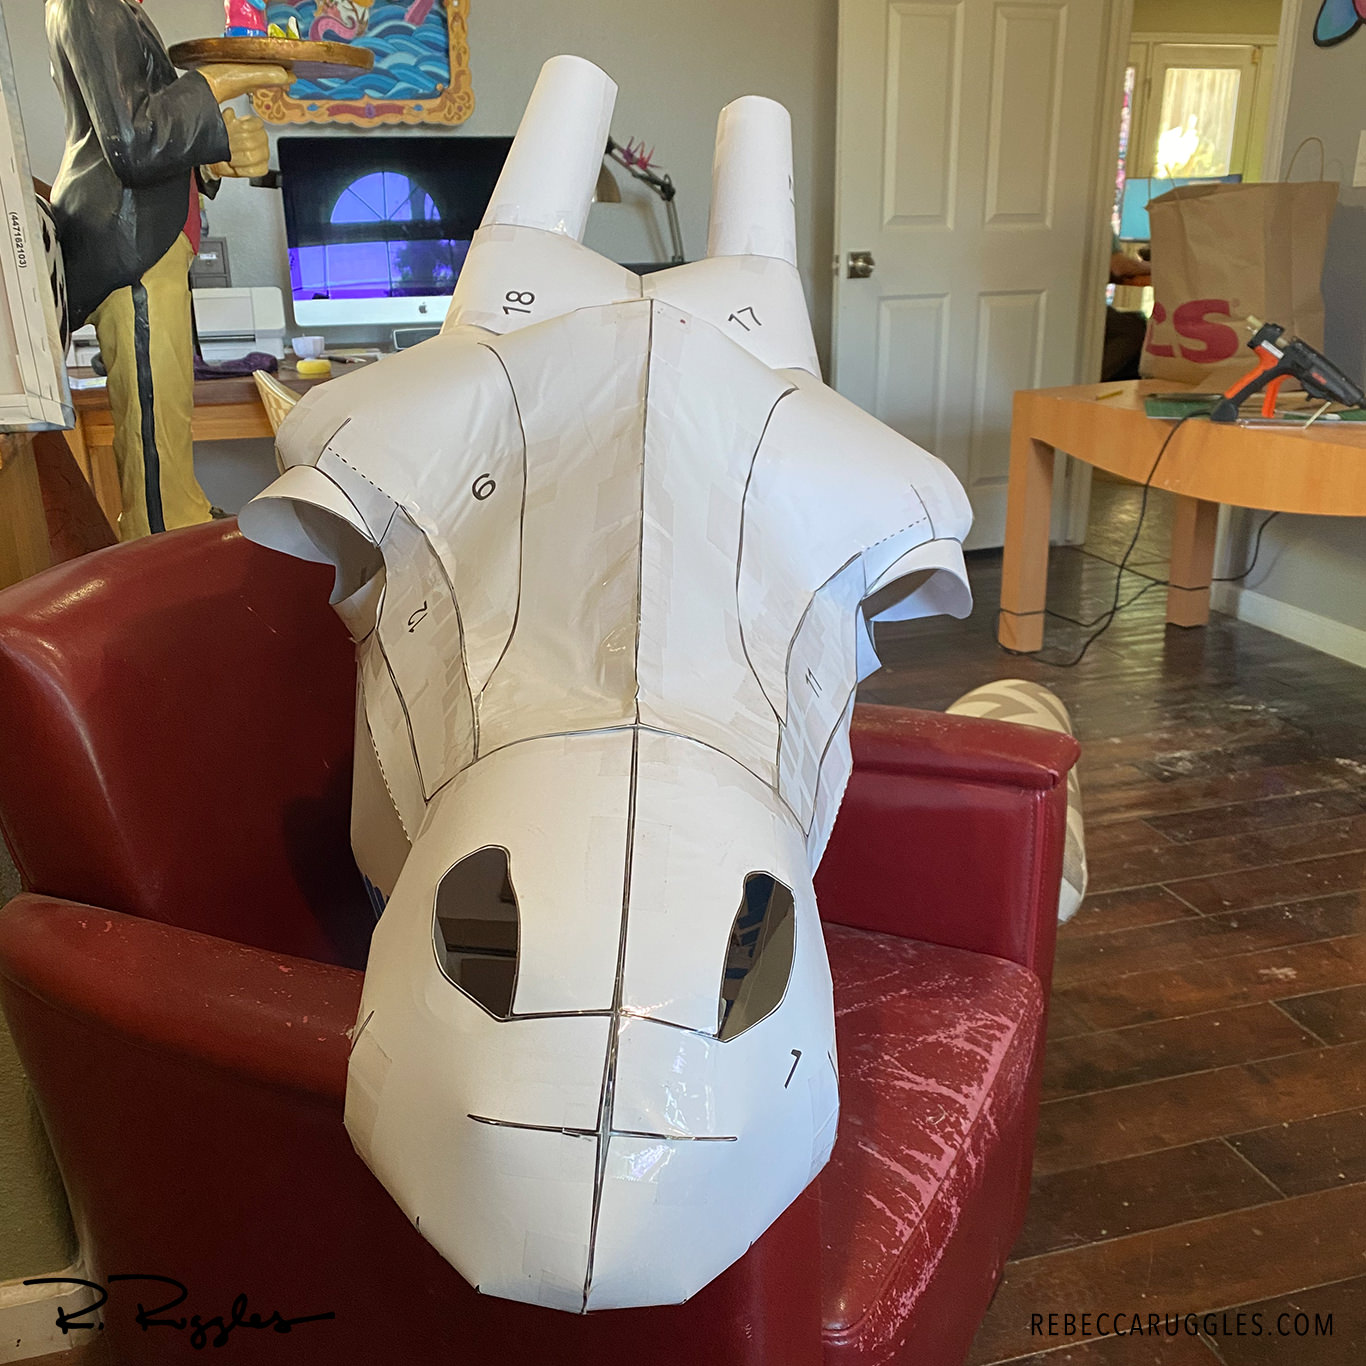 Firming things up on the Giraffe head.